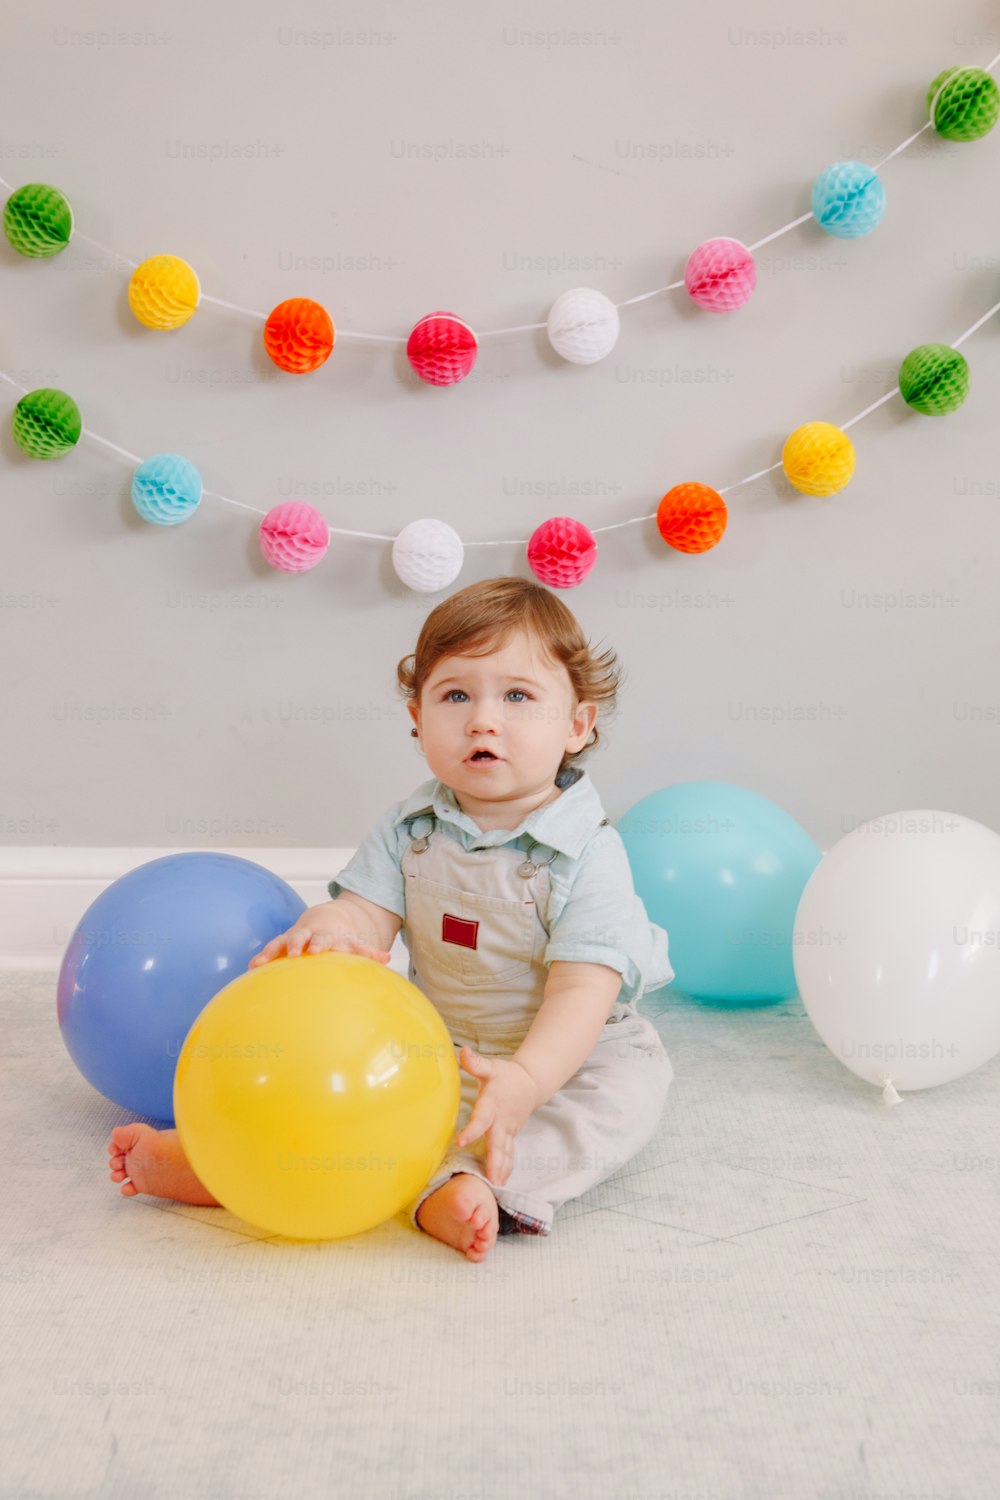 Funny Caucasian baby boy celebrating his first birthday. Child kid toddler sitting on floor with colorful balloons. Celebration of event or party indoors at home. Happy birthday lifestyle concept.